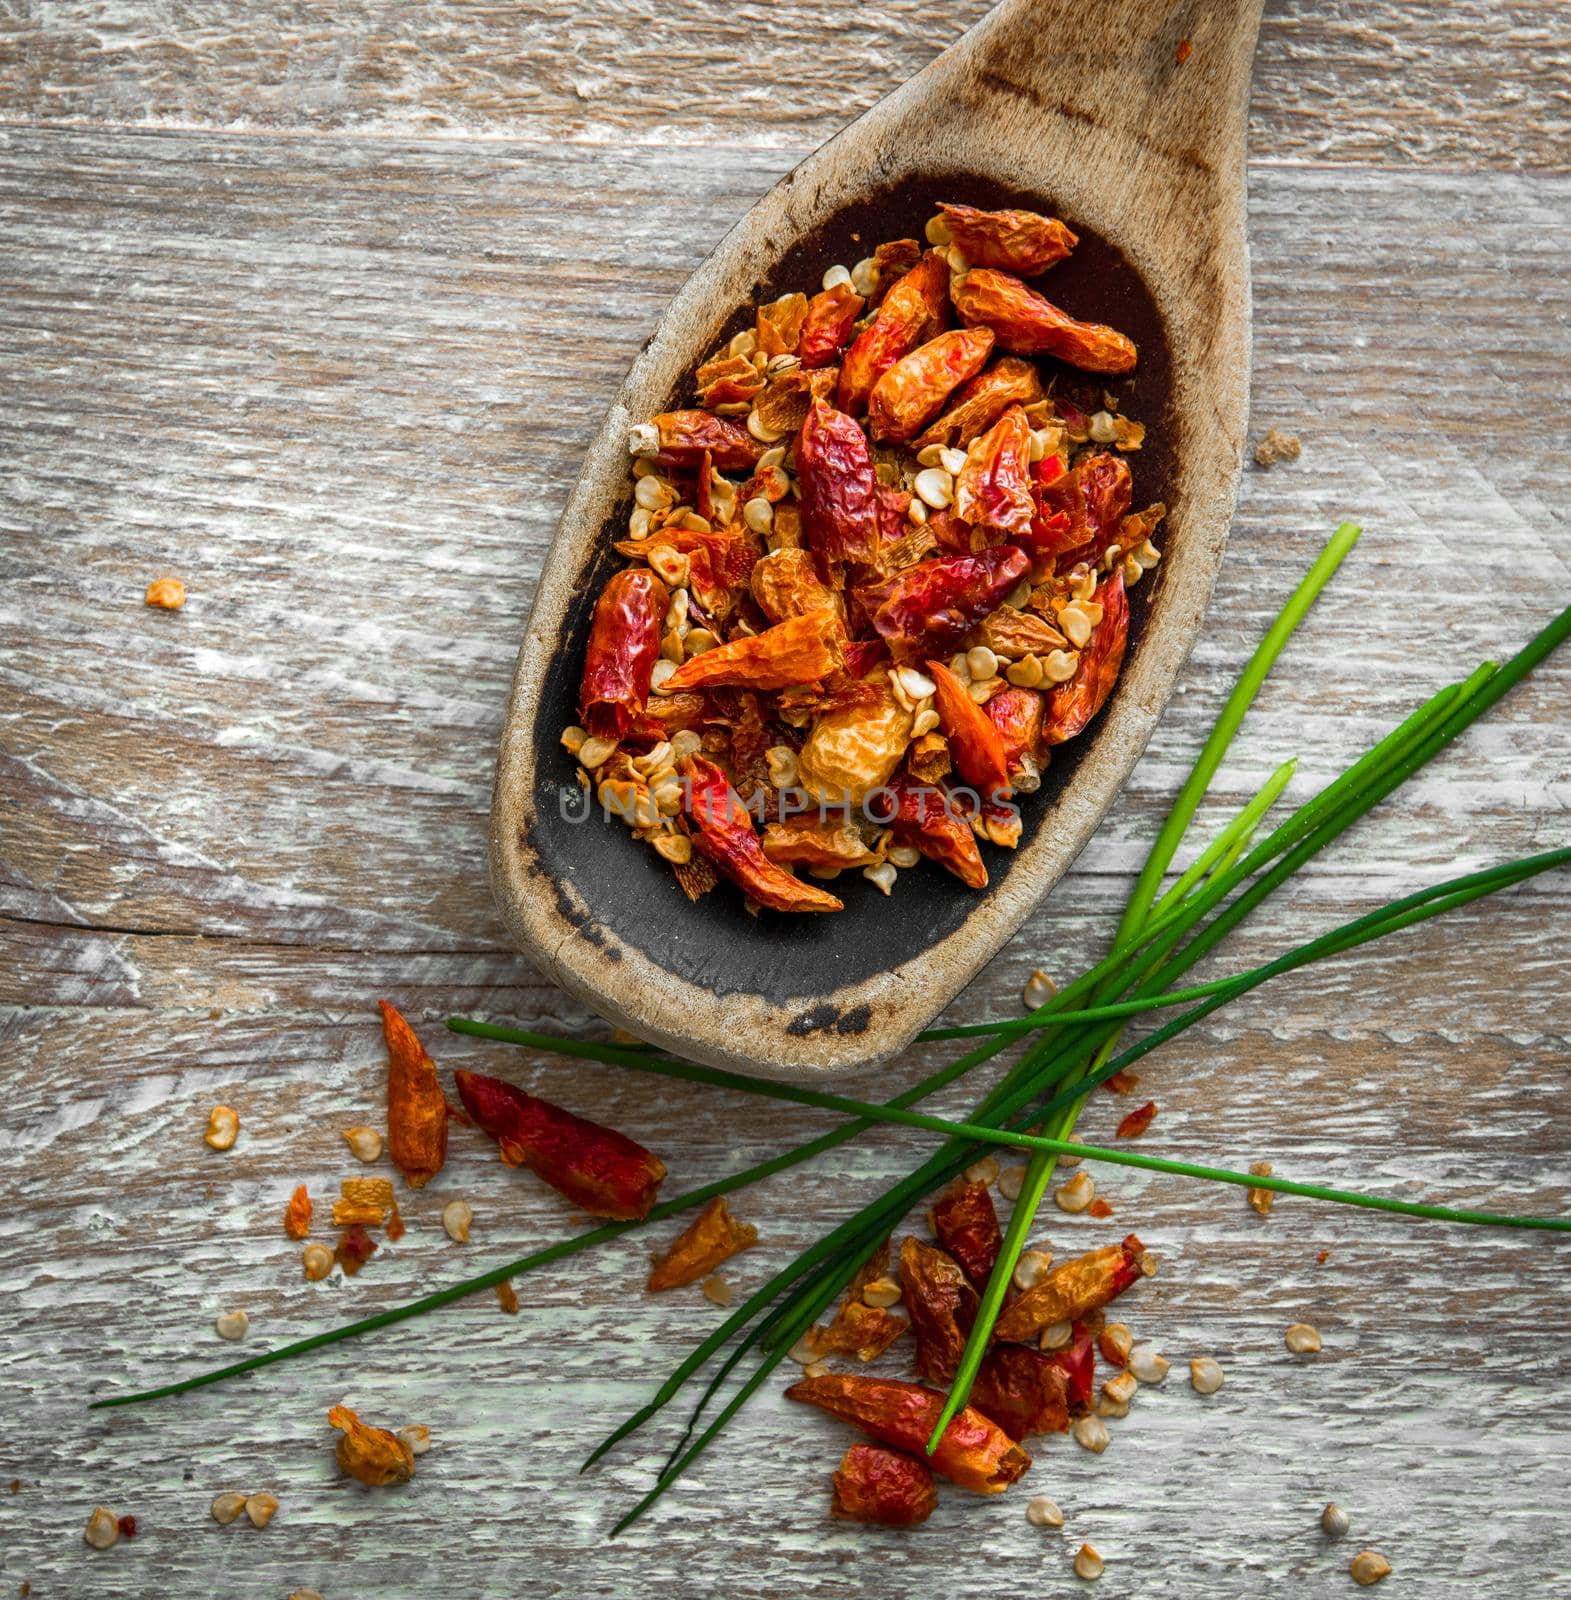 Dried chili pepper in a wooden spoon on a textured background